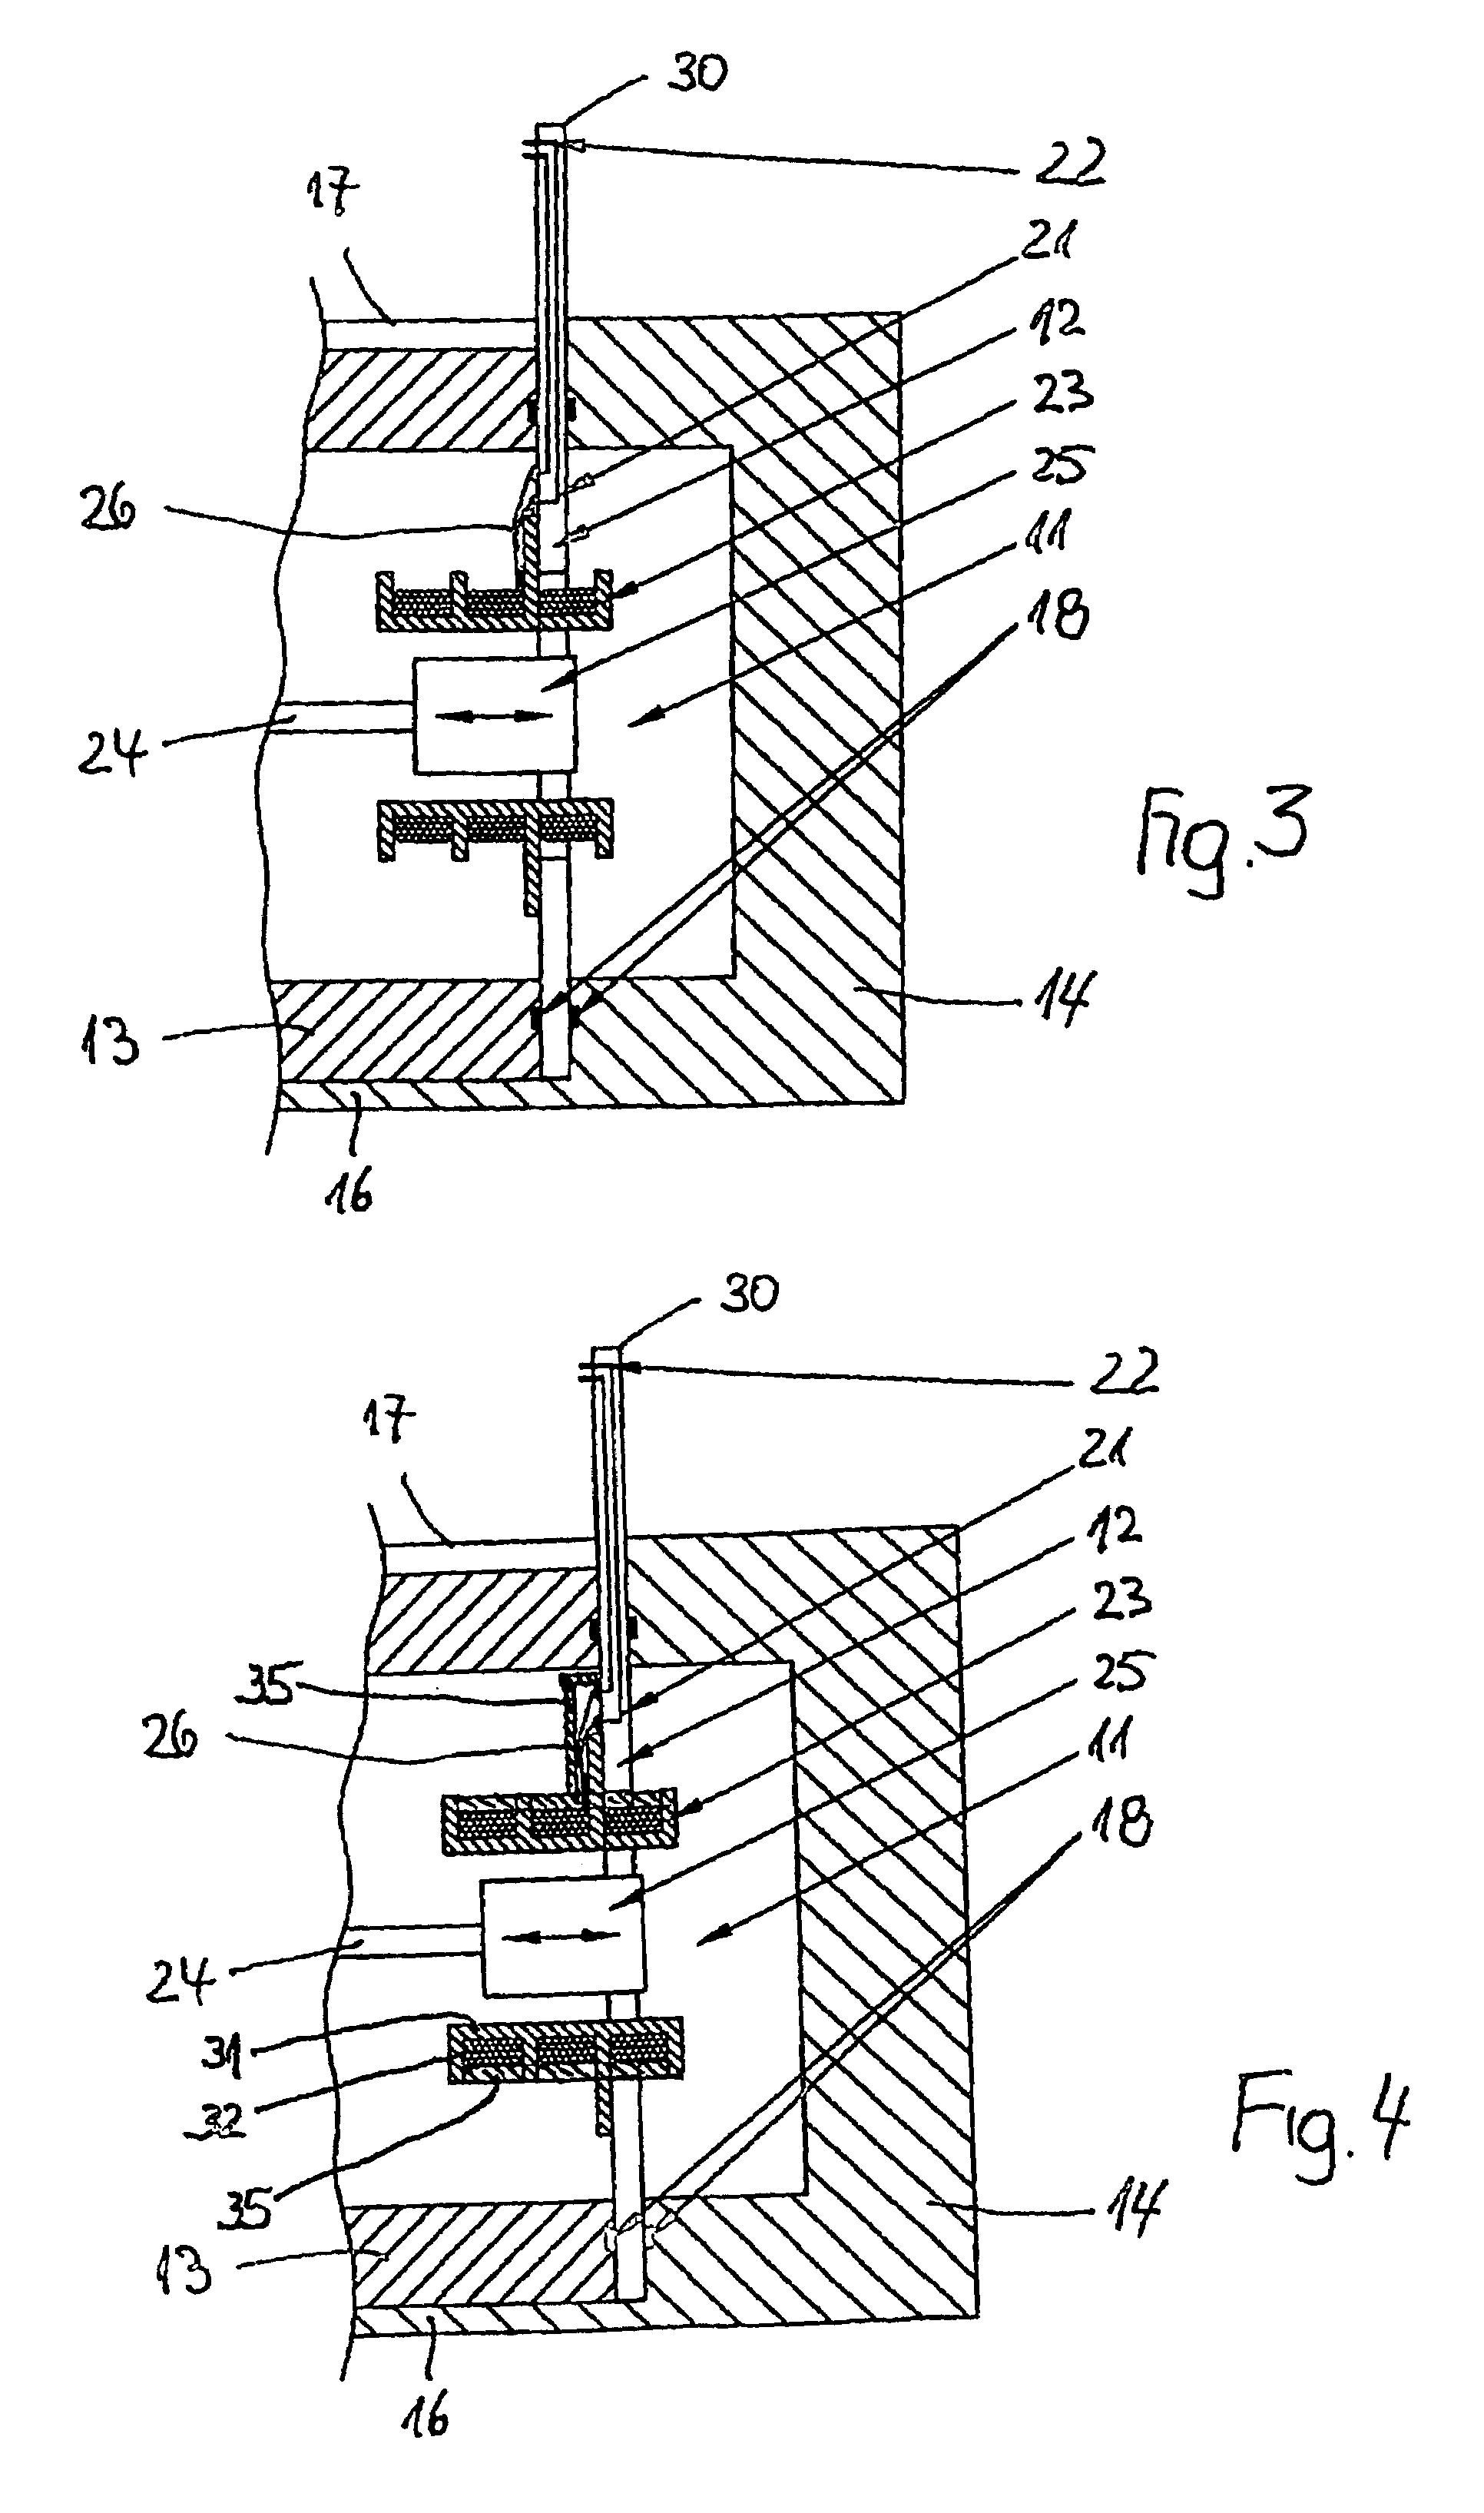 System for detecting and transmitting test data from a pressure chamber filled with a high-pressure fluid